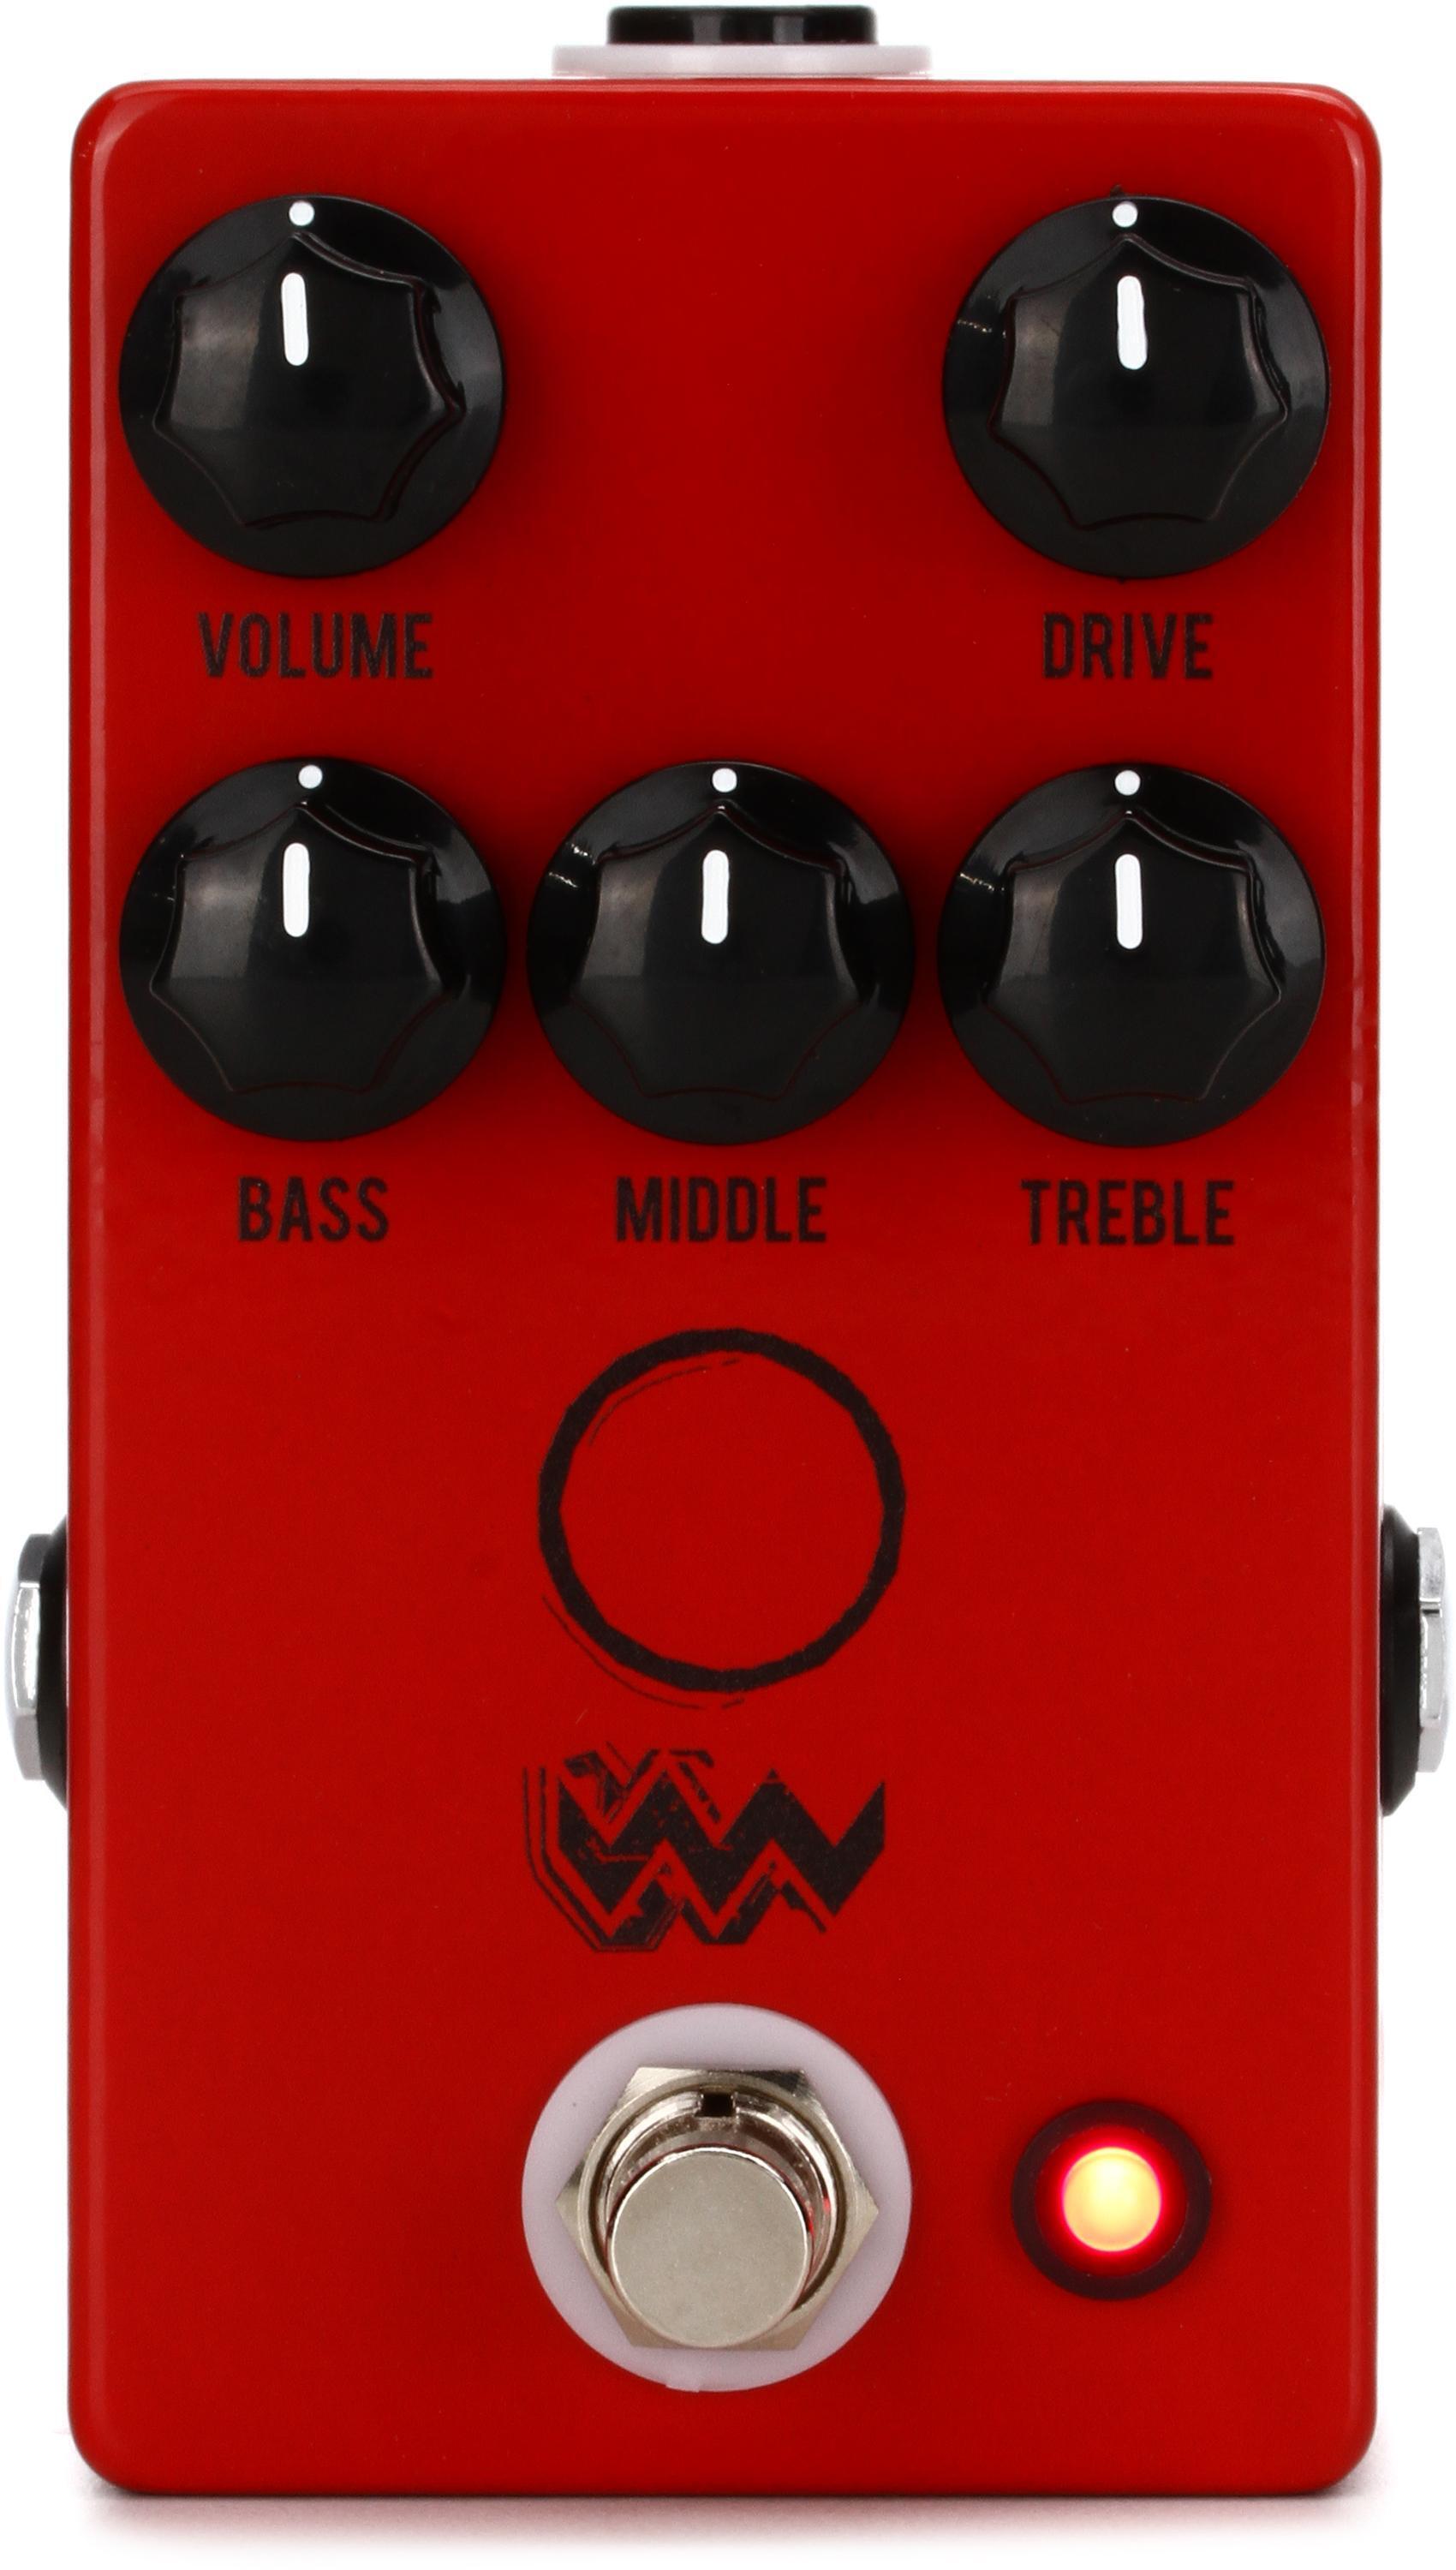 Wampler cataPulp British Distortion Pedal | Sweetwater